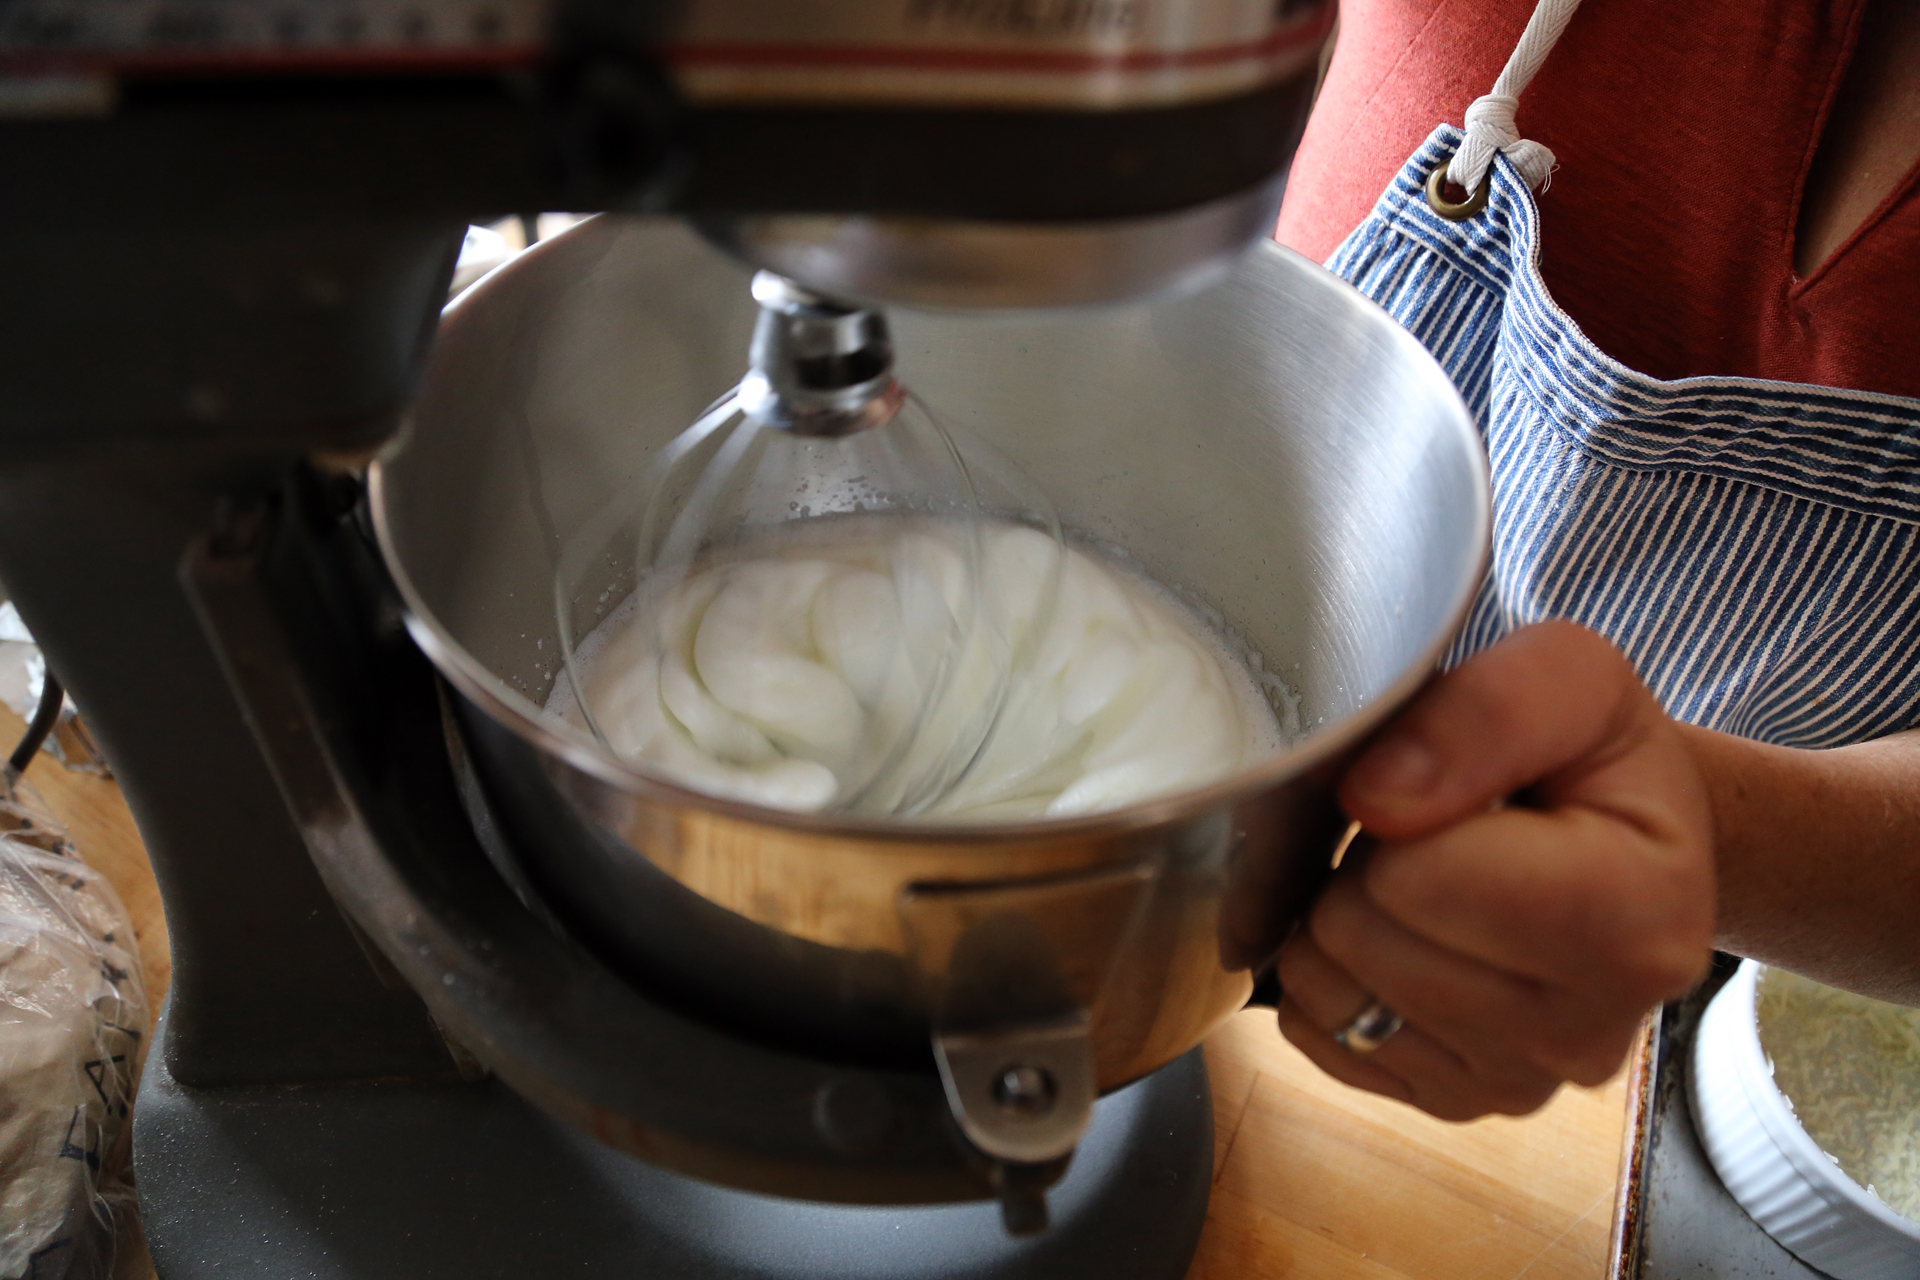 In a large bowl, using an electric mixer fitted with the whisk attachment, beat the egg whites and cream of tartar.